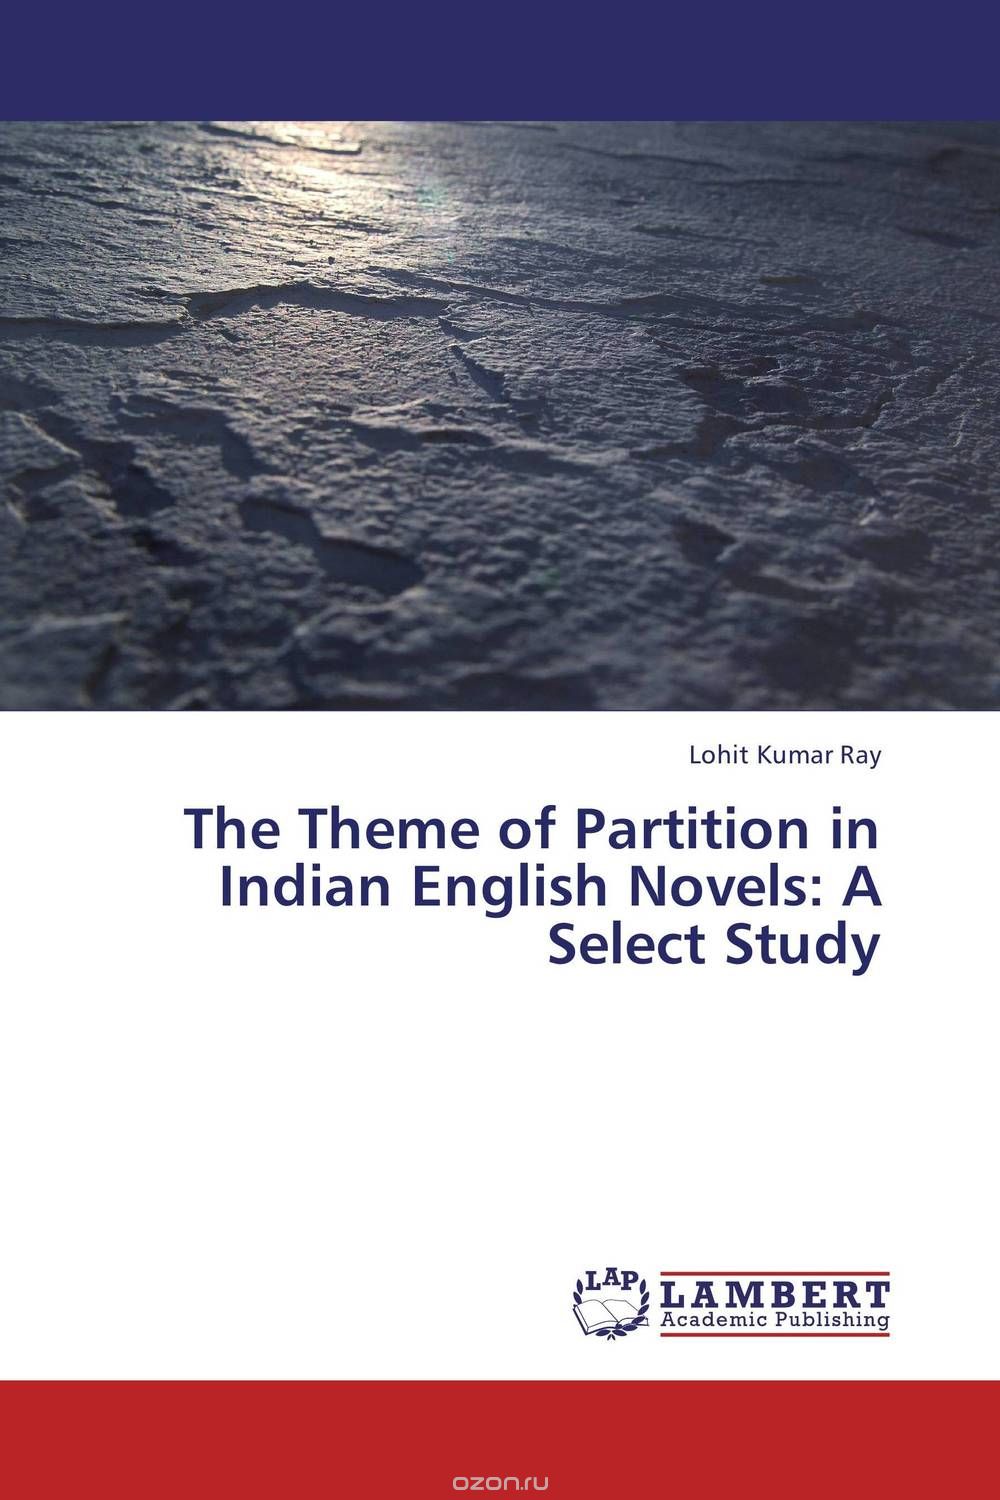 Скачать книгу "The Theme of Partition in Indian English Novels: A Select Study"